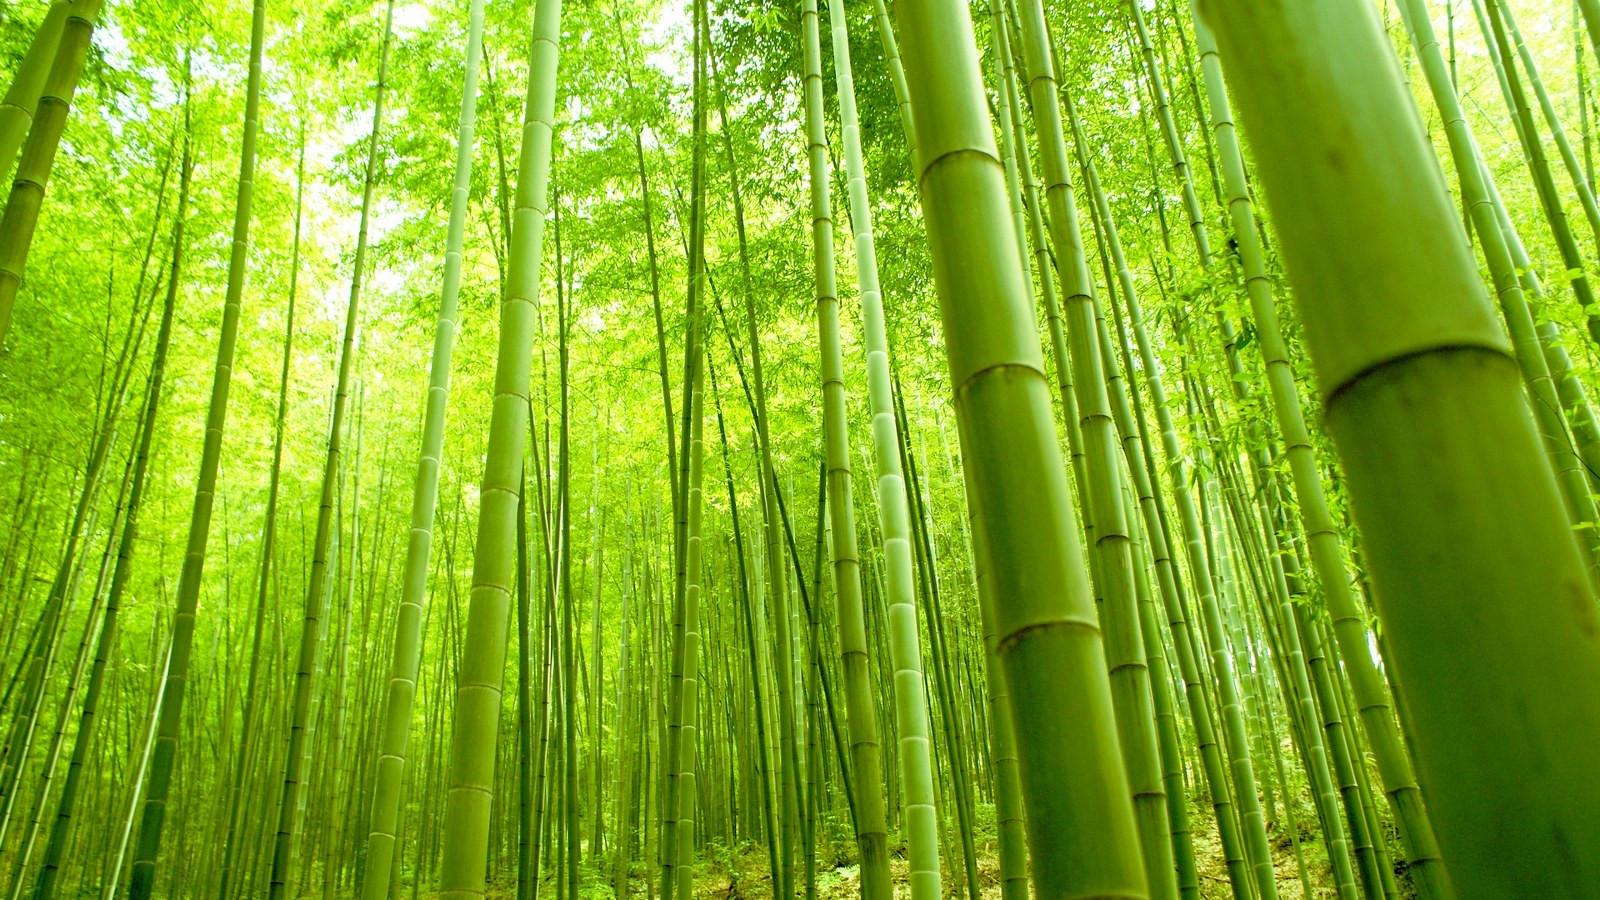 Japan Bamboo forest Wallpaper Magnificent Bamboo forest Japan Puter